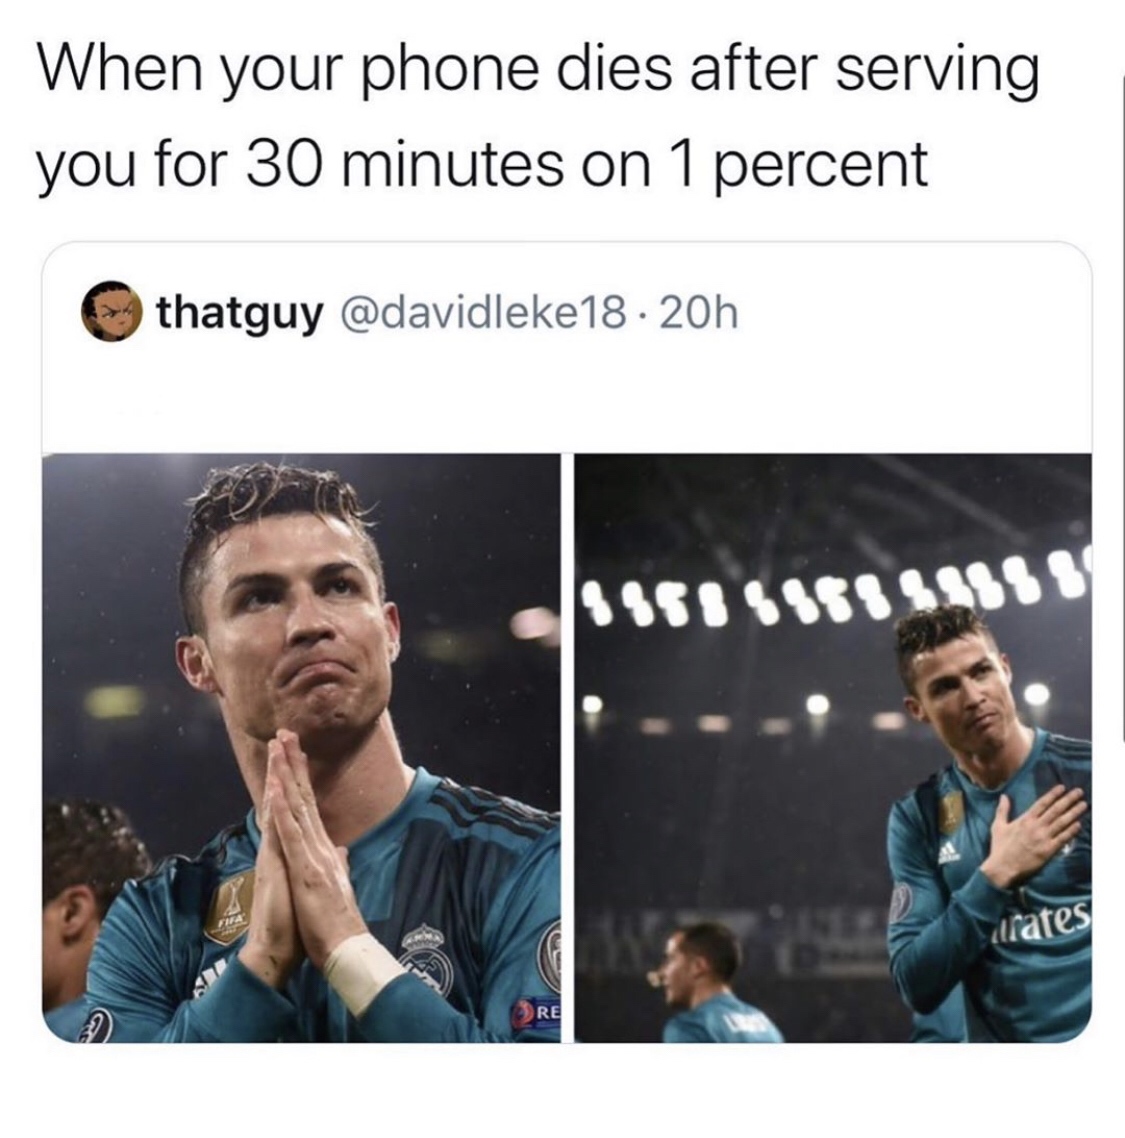 conversation - When your phone dies after serving you for 30 minutes on 1 percent thatguy . 20h 9888586854858 Re